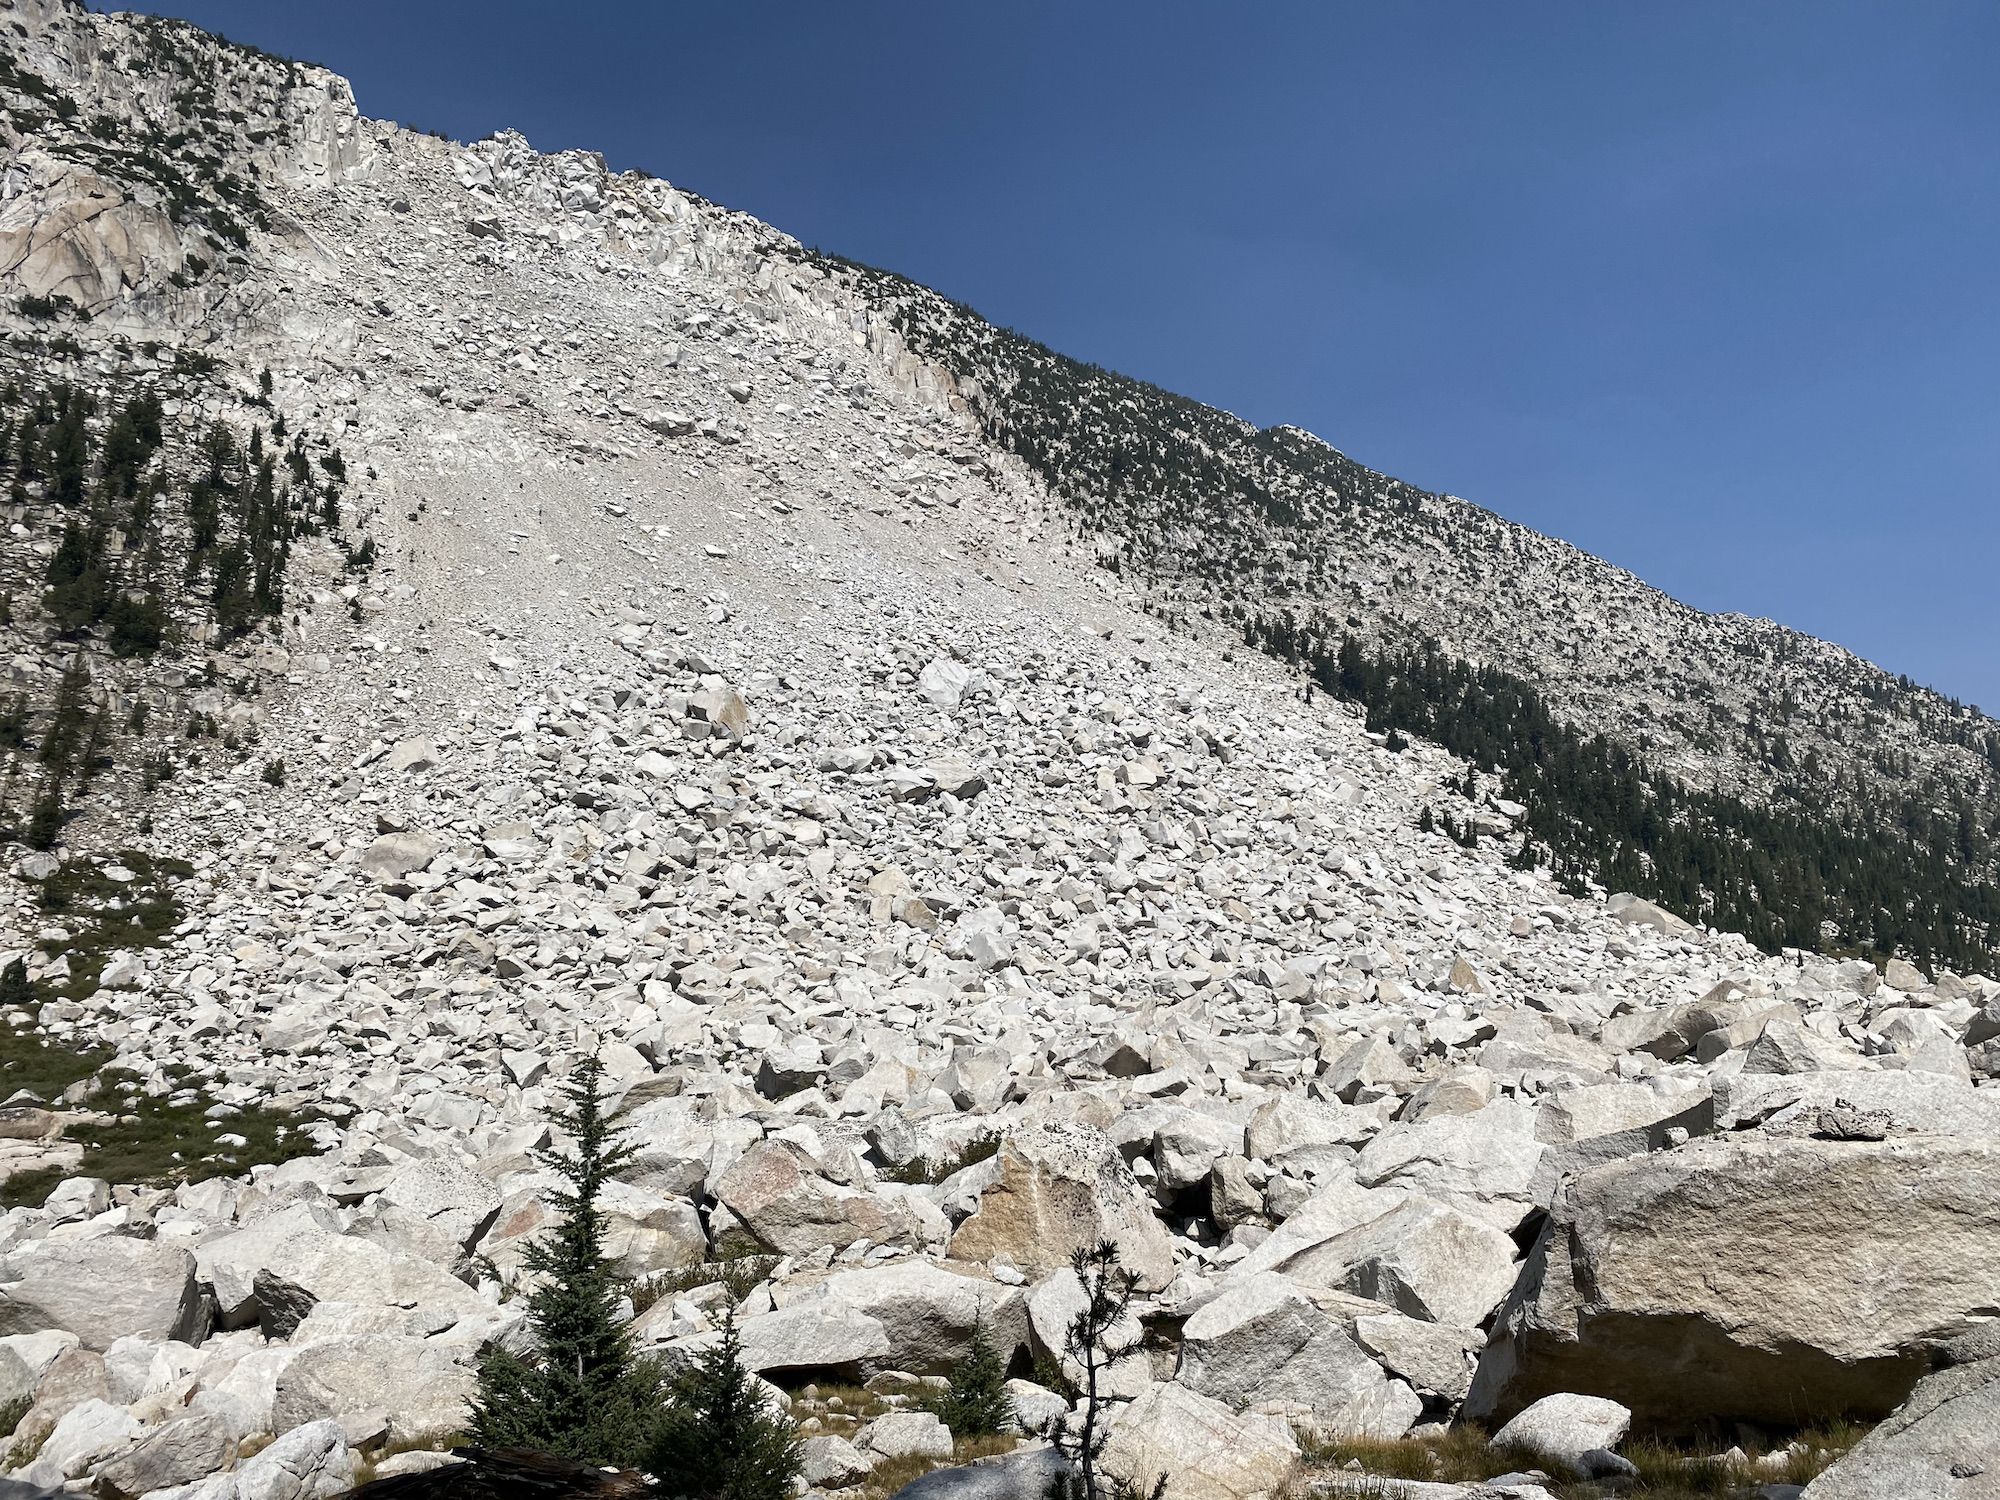 A large rockslide with rocks as large as cars.